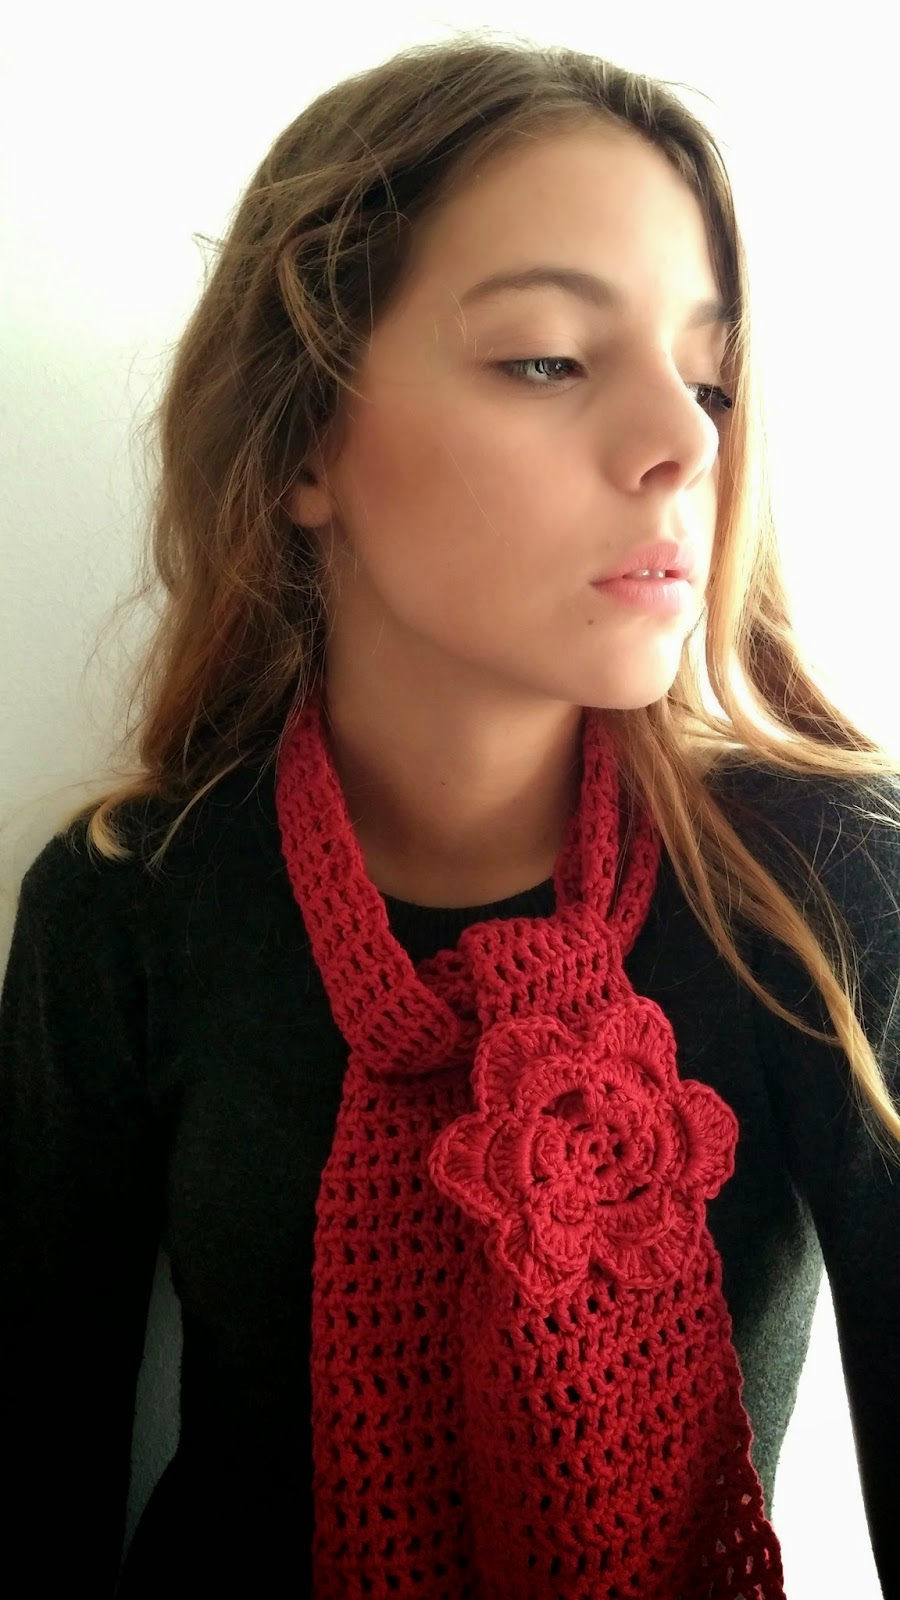 http://thelittletreasures.blogspot.com/2014/10/double-crochet-stitch-scarf-free-pattern.html